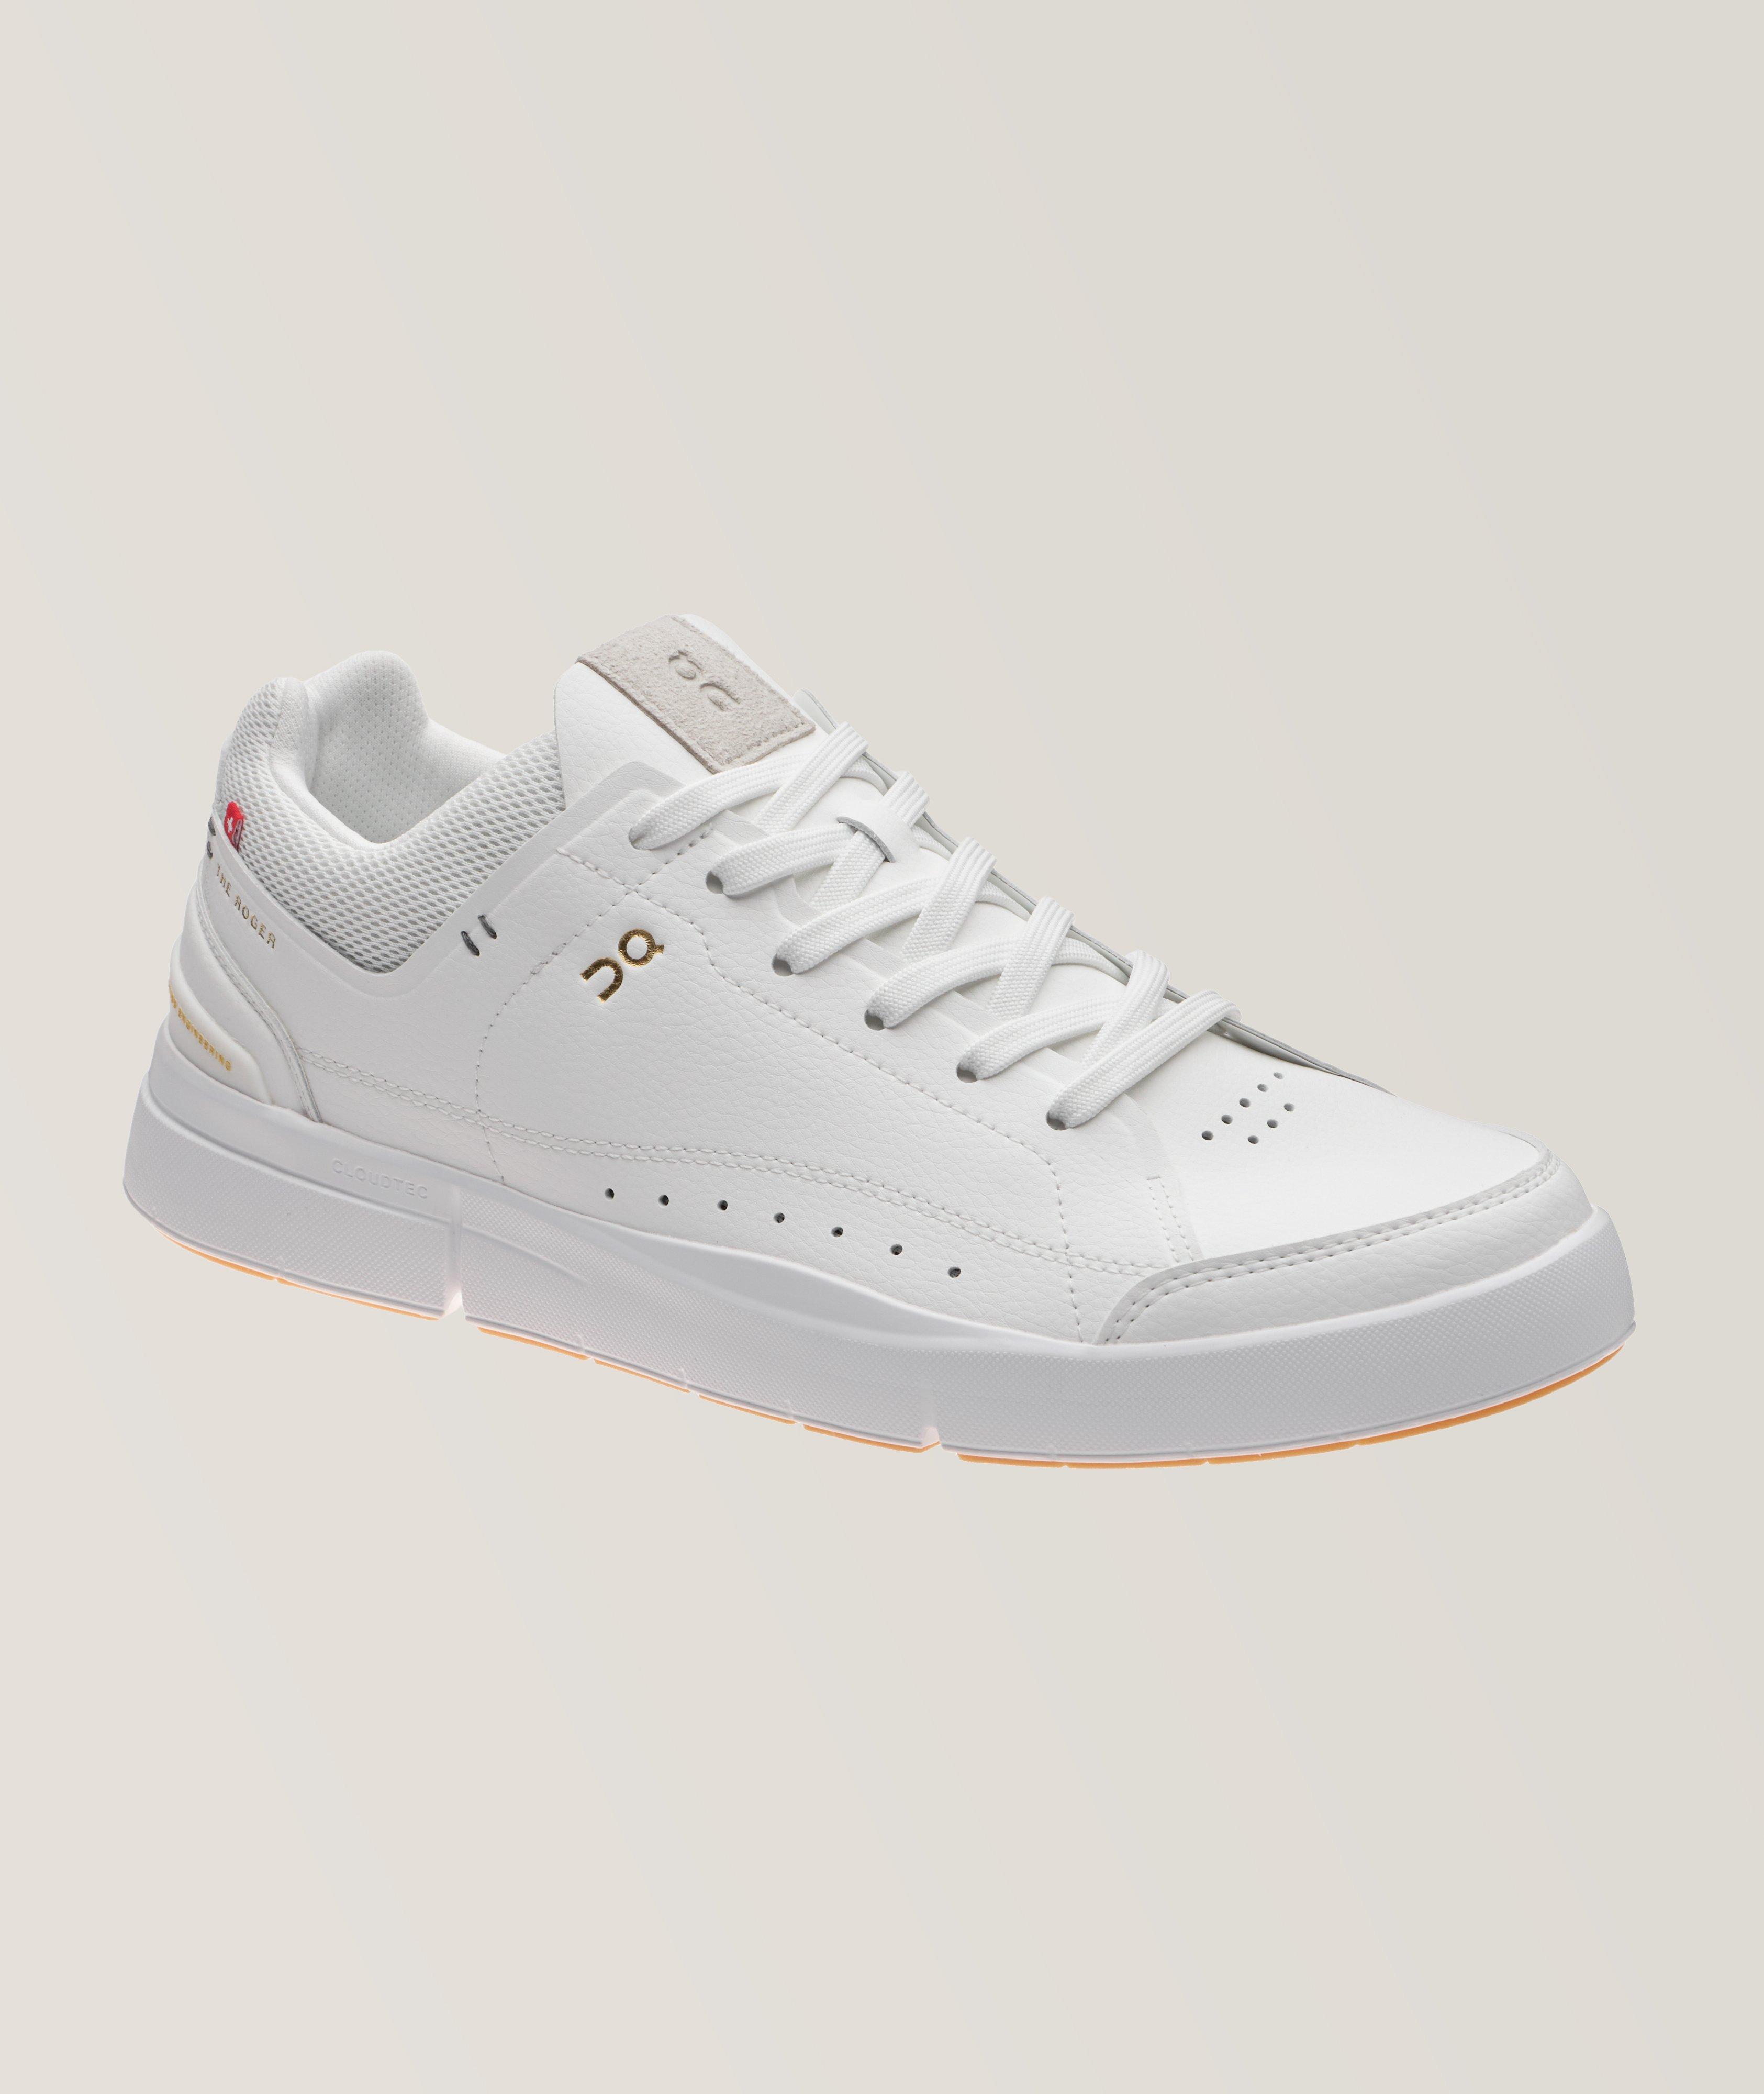 THE ROGER Center Court 2 Sneakers